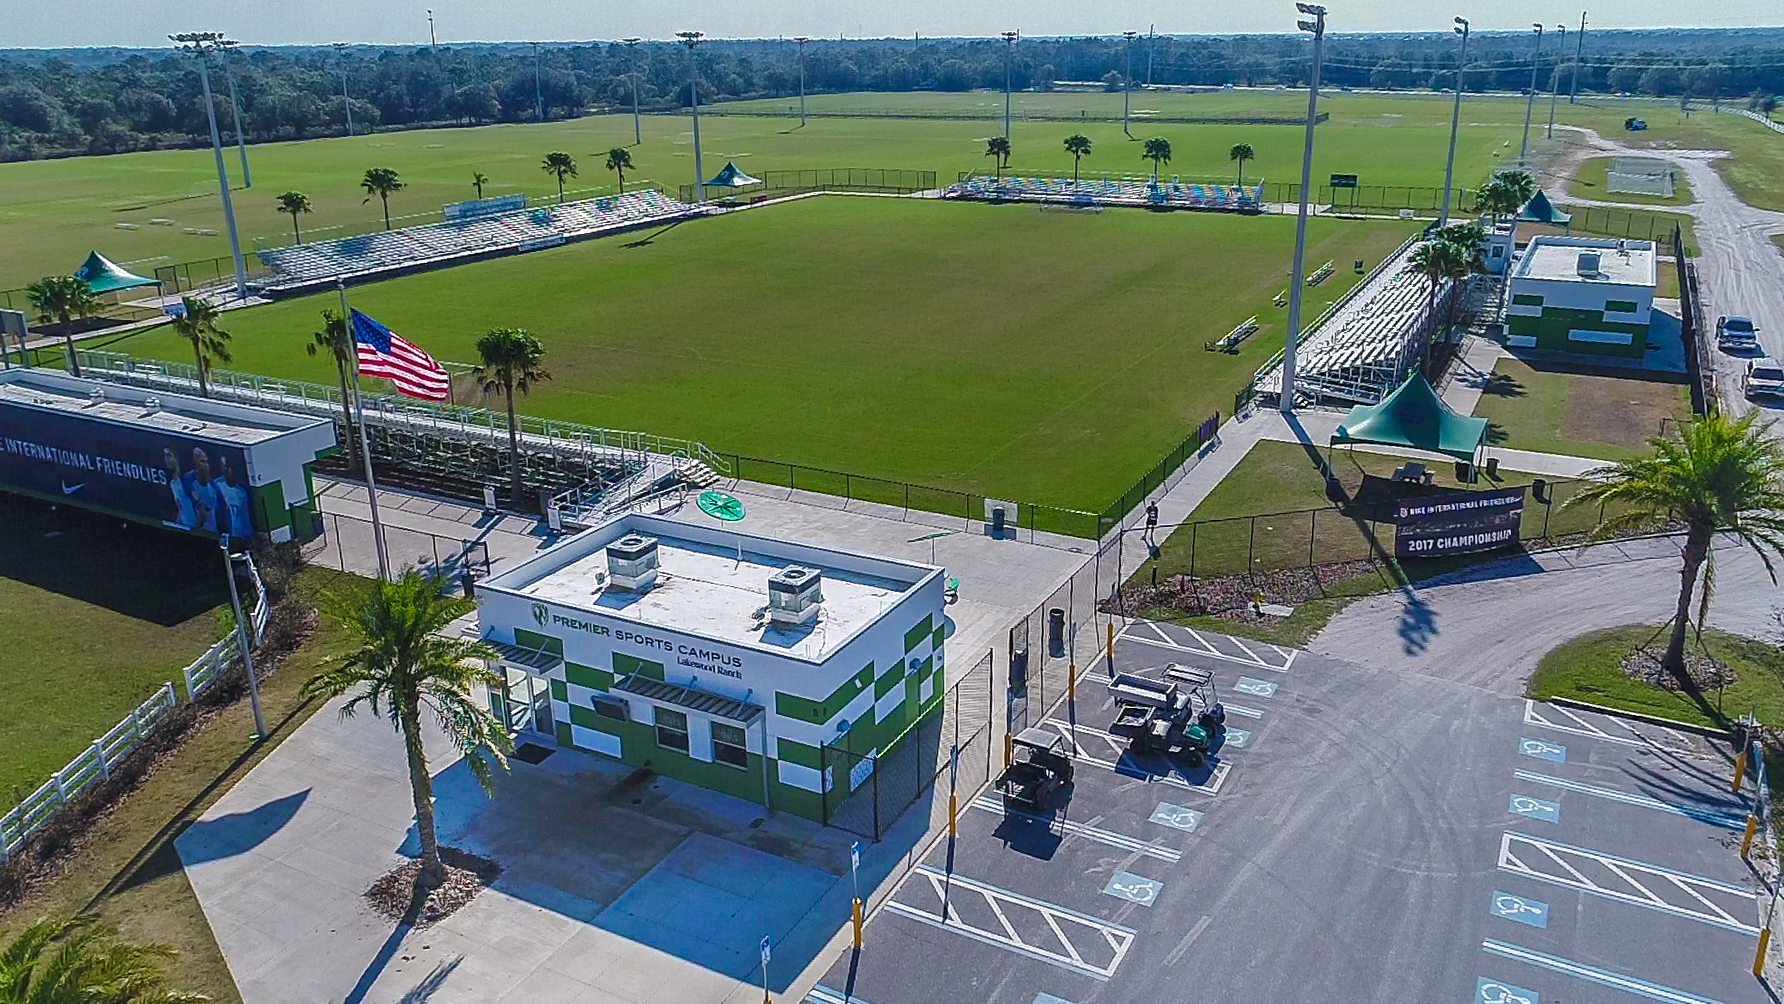 This image of Premier Sports Campus was taken by a Manatee County drone while it was documenting irrigation infrastructure. (Courtesy of Manatee County)